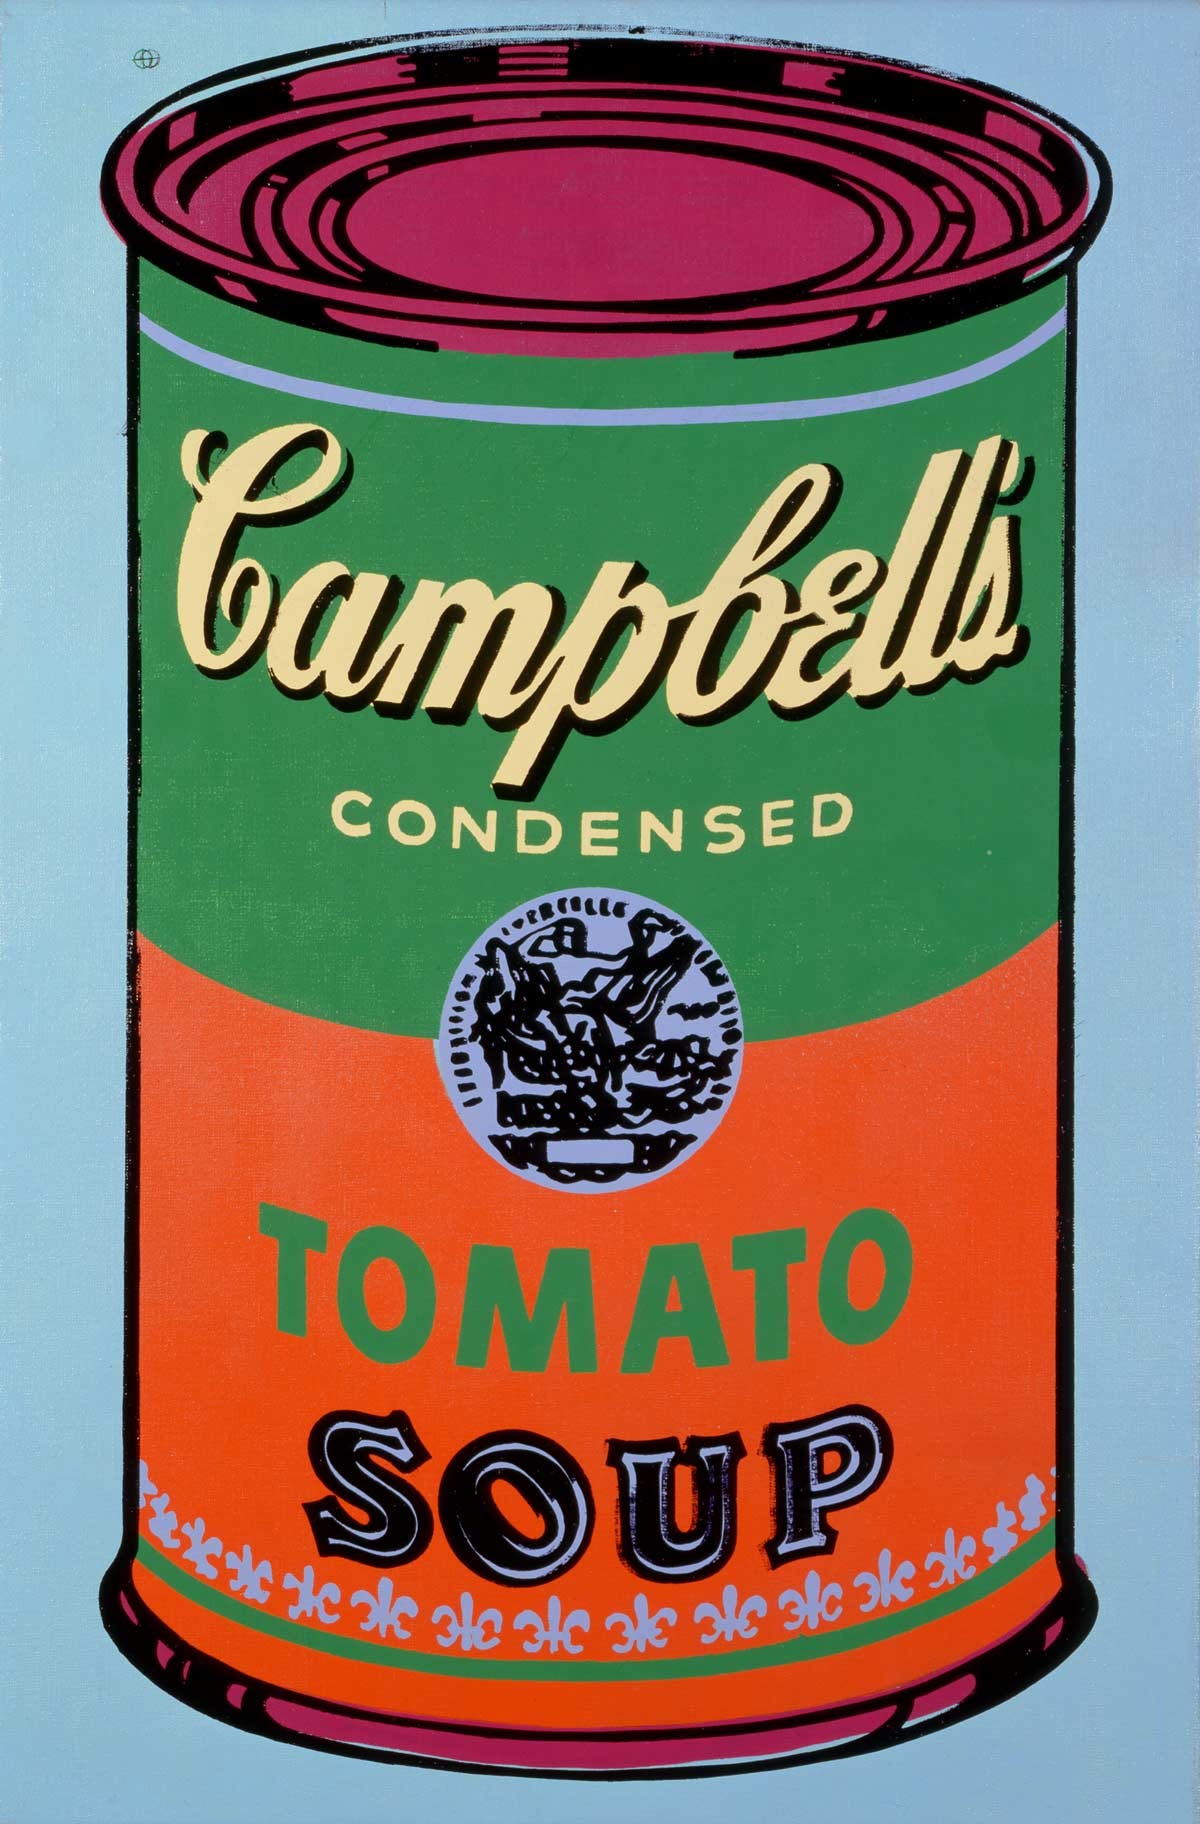 Andy Warhol silk screen of Campbell's Soup can. The label is green and orange. The tin is a pink purple.